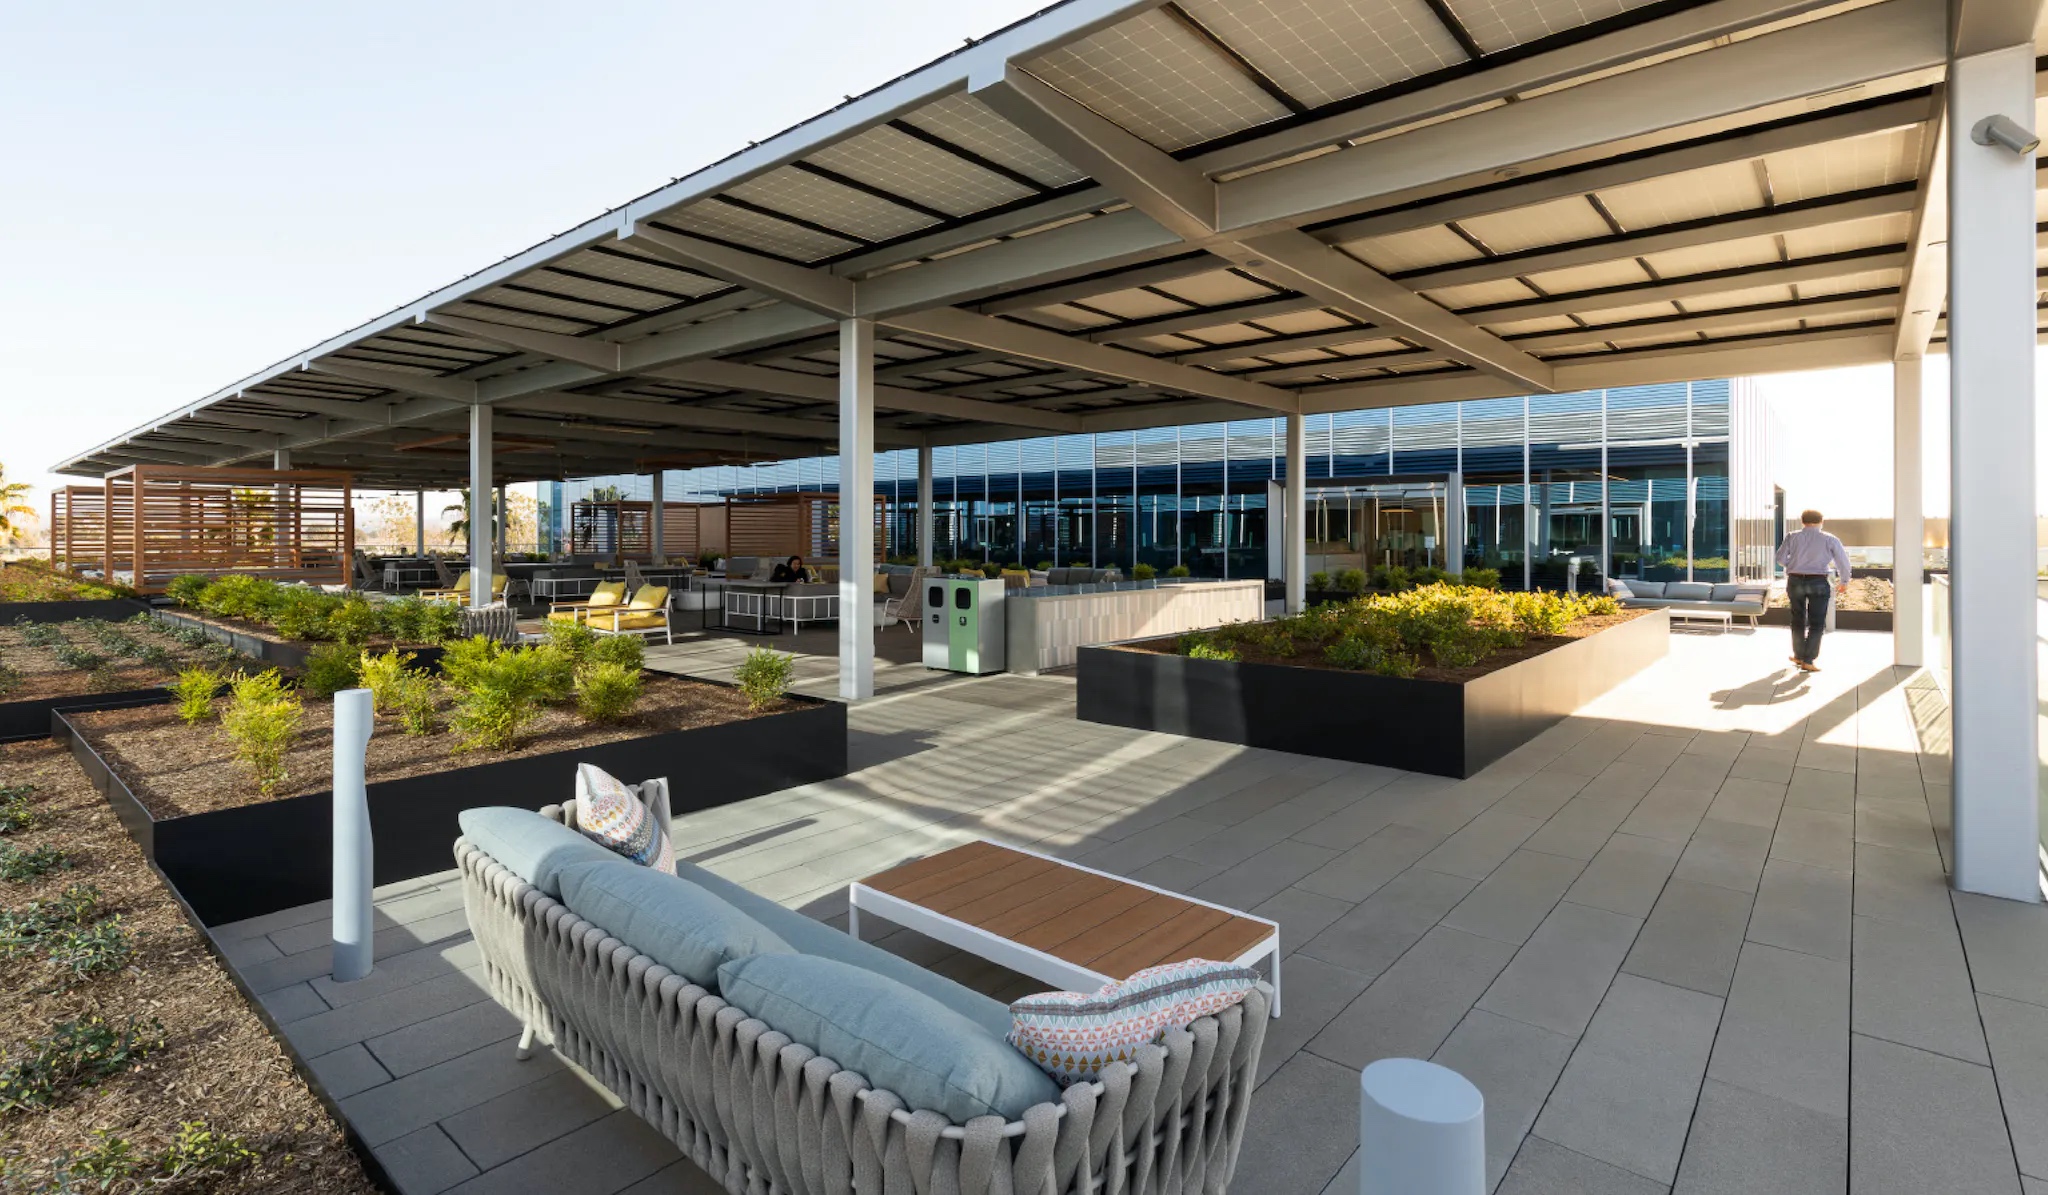 Edwards Lifesciences expansion project uses PV panels to shade outdoor collaborative areas on the third floor deck.